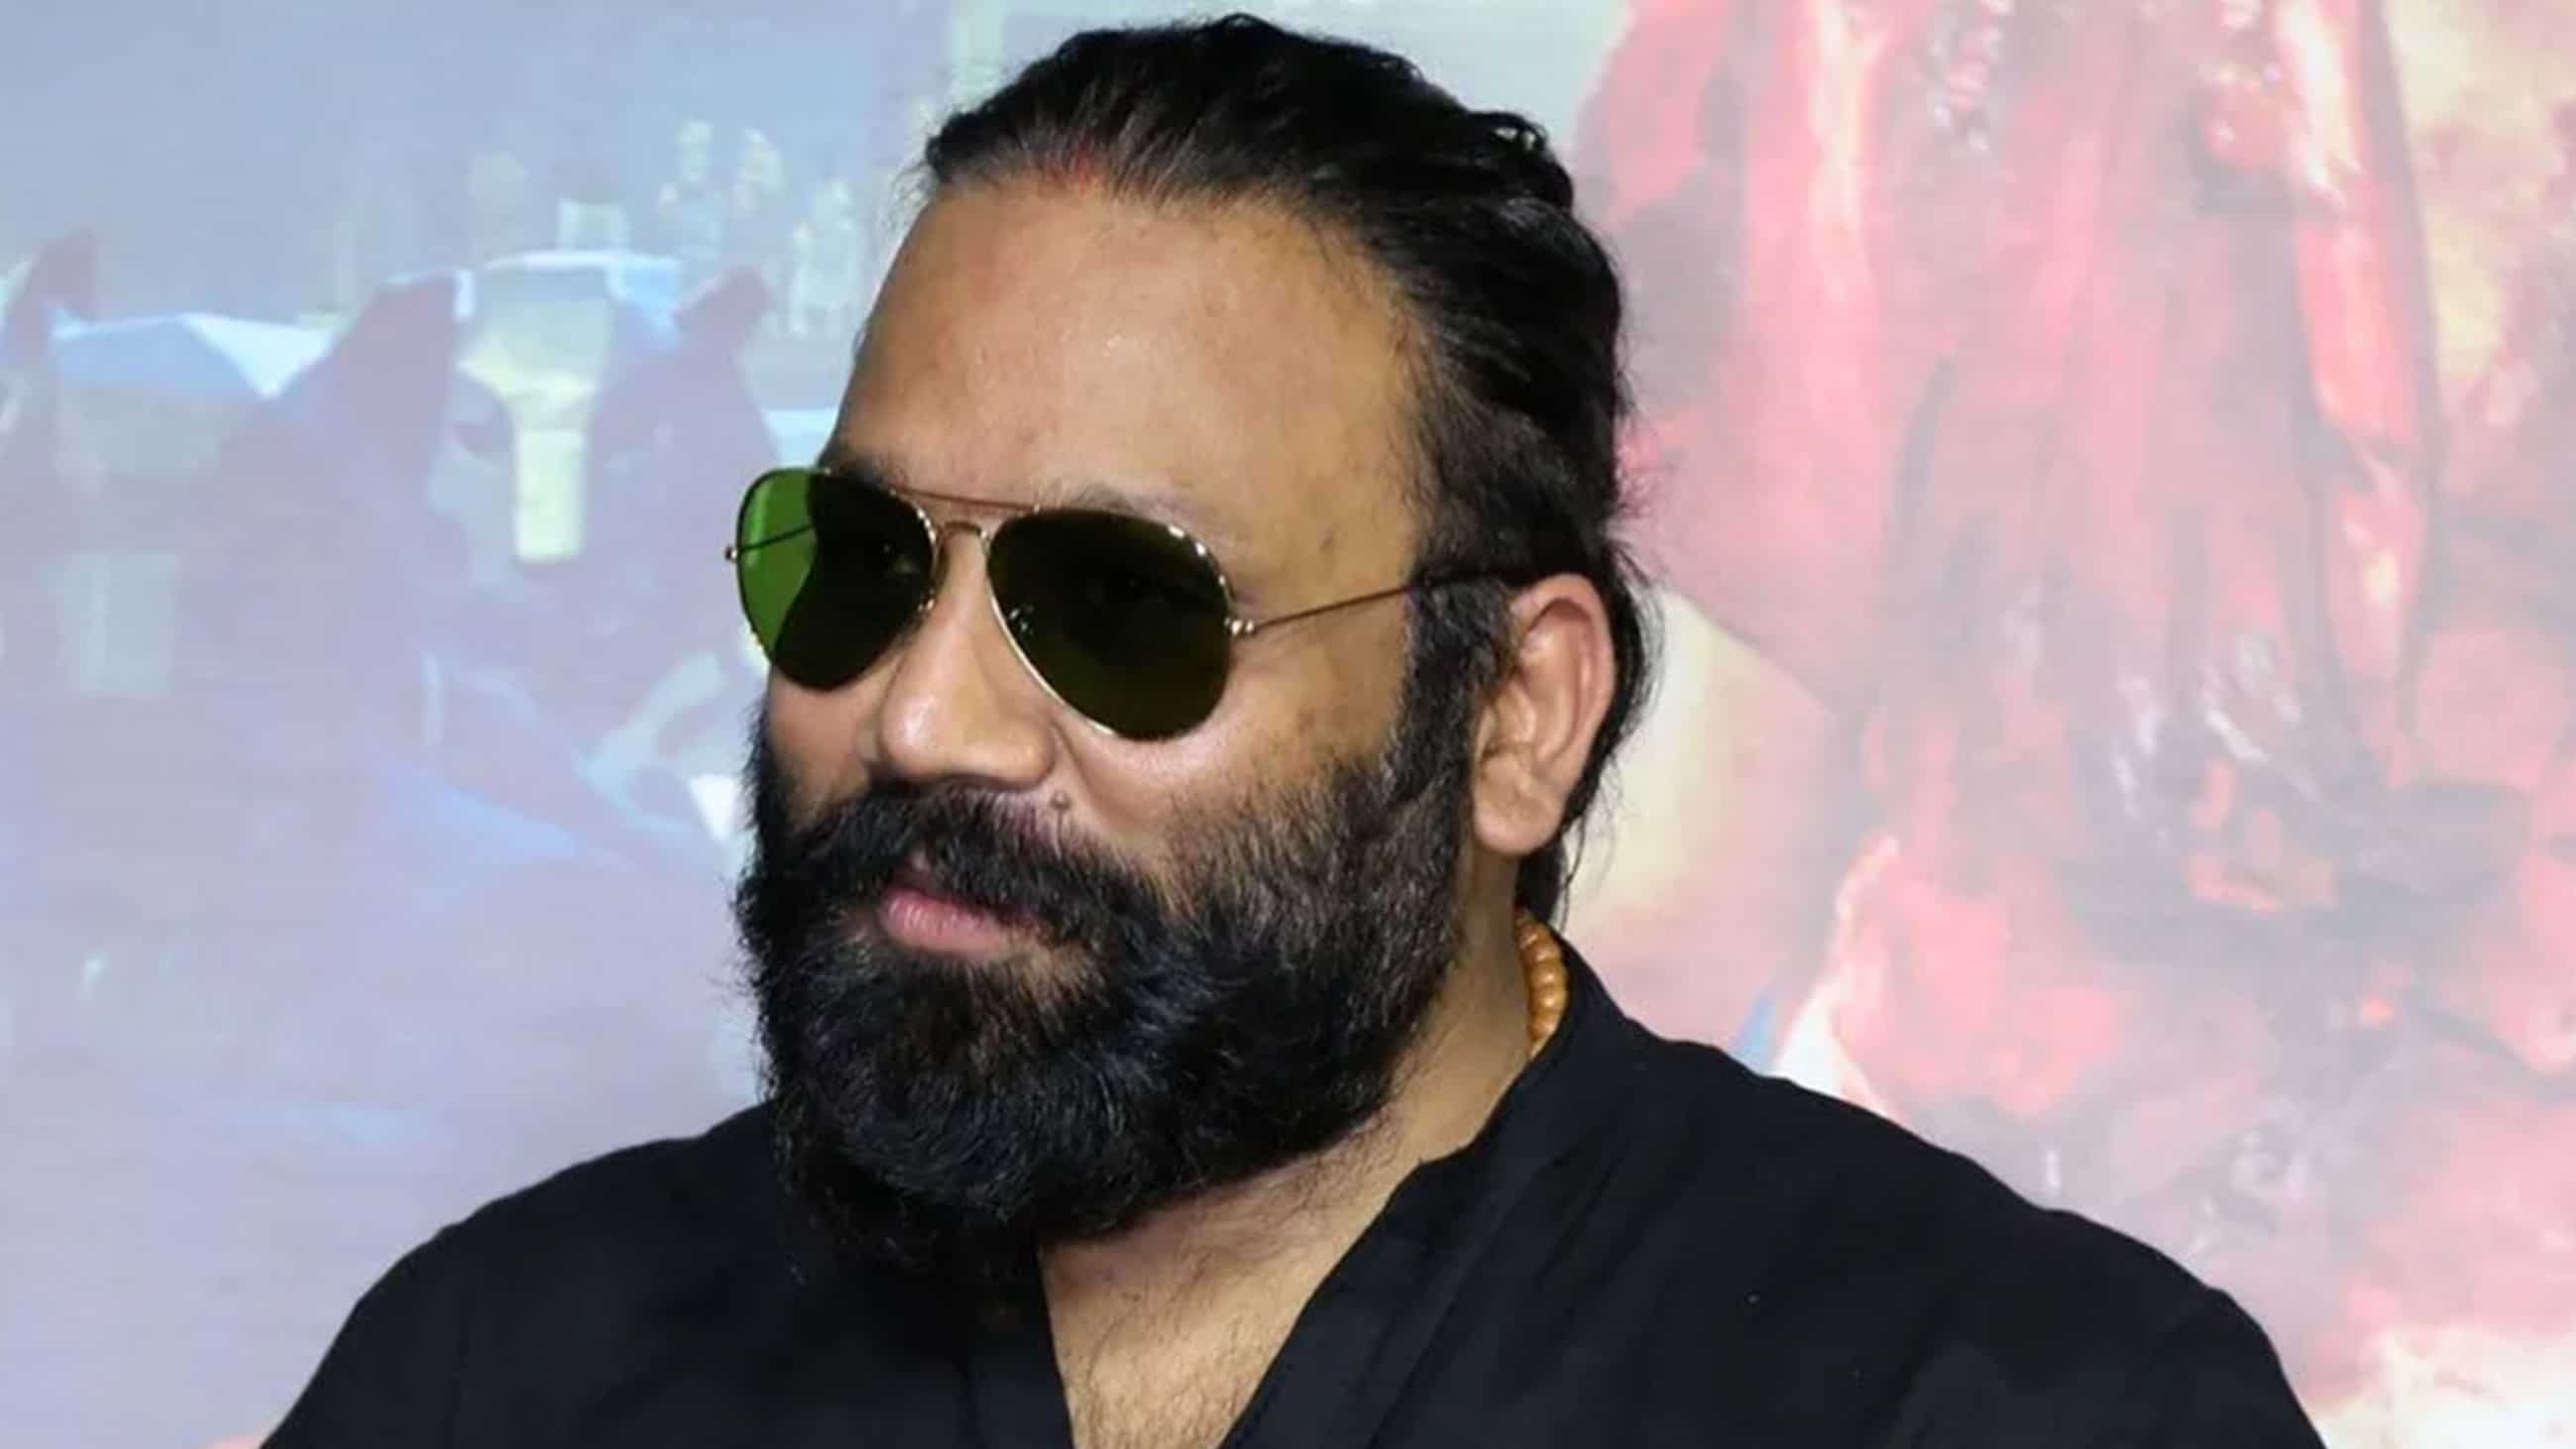 https://www.mobilemasala.com/film-gossip/Spirit---Sandeep-Reddy-Vanga-is-only-worried-about-THIS-while-making-Prabhas-starrer-i252000